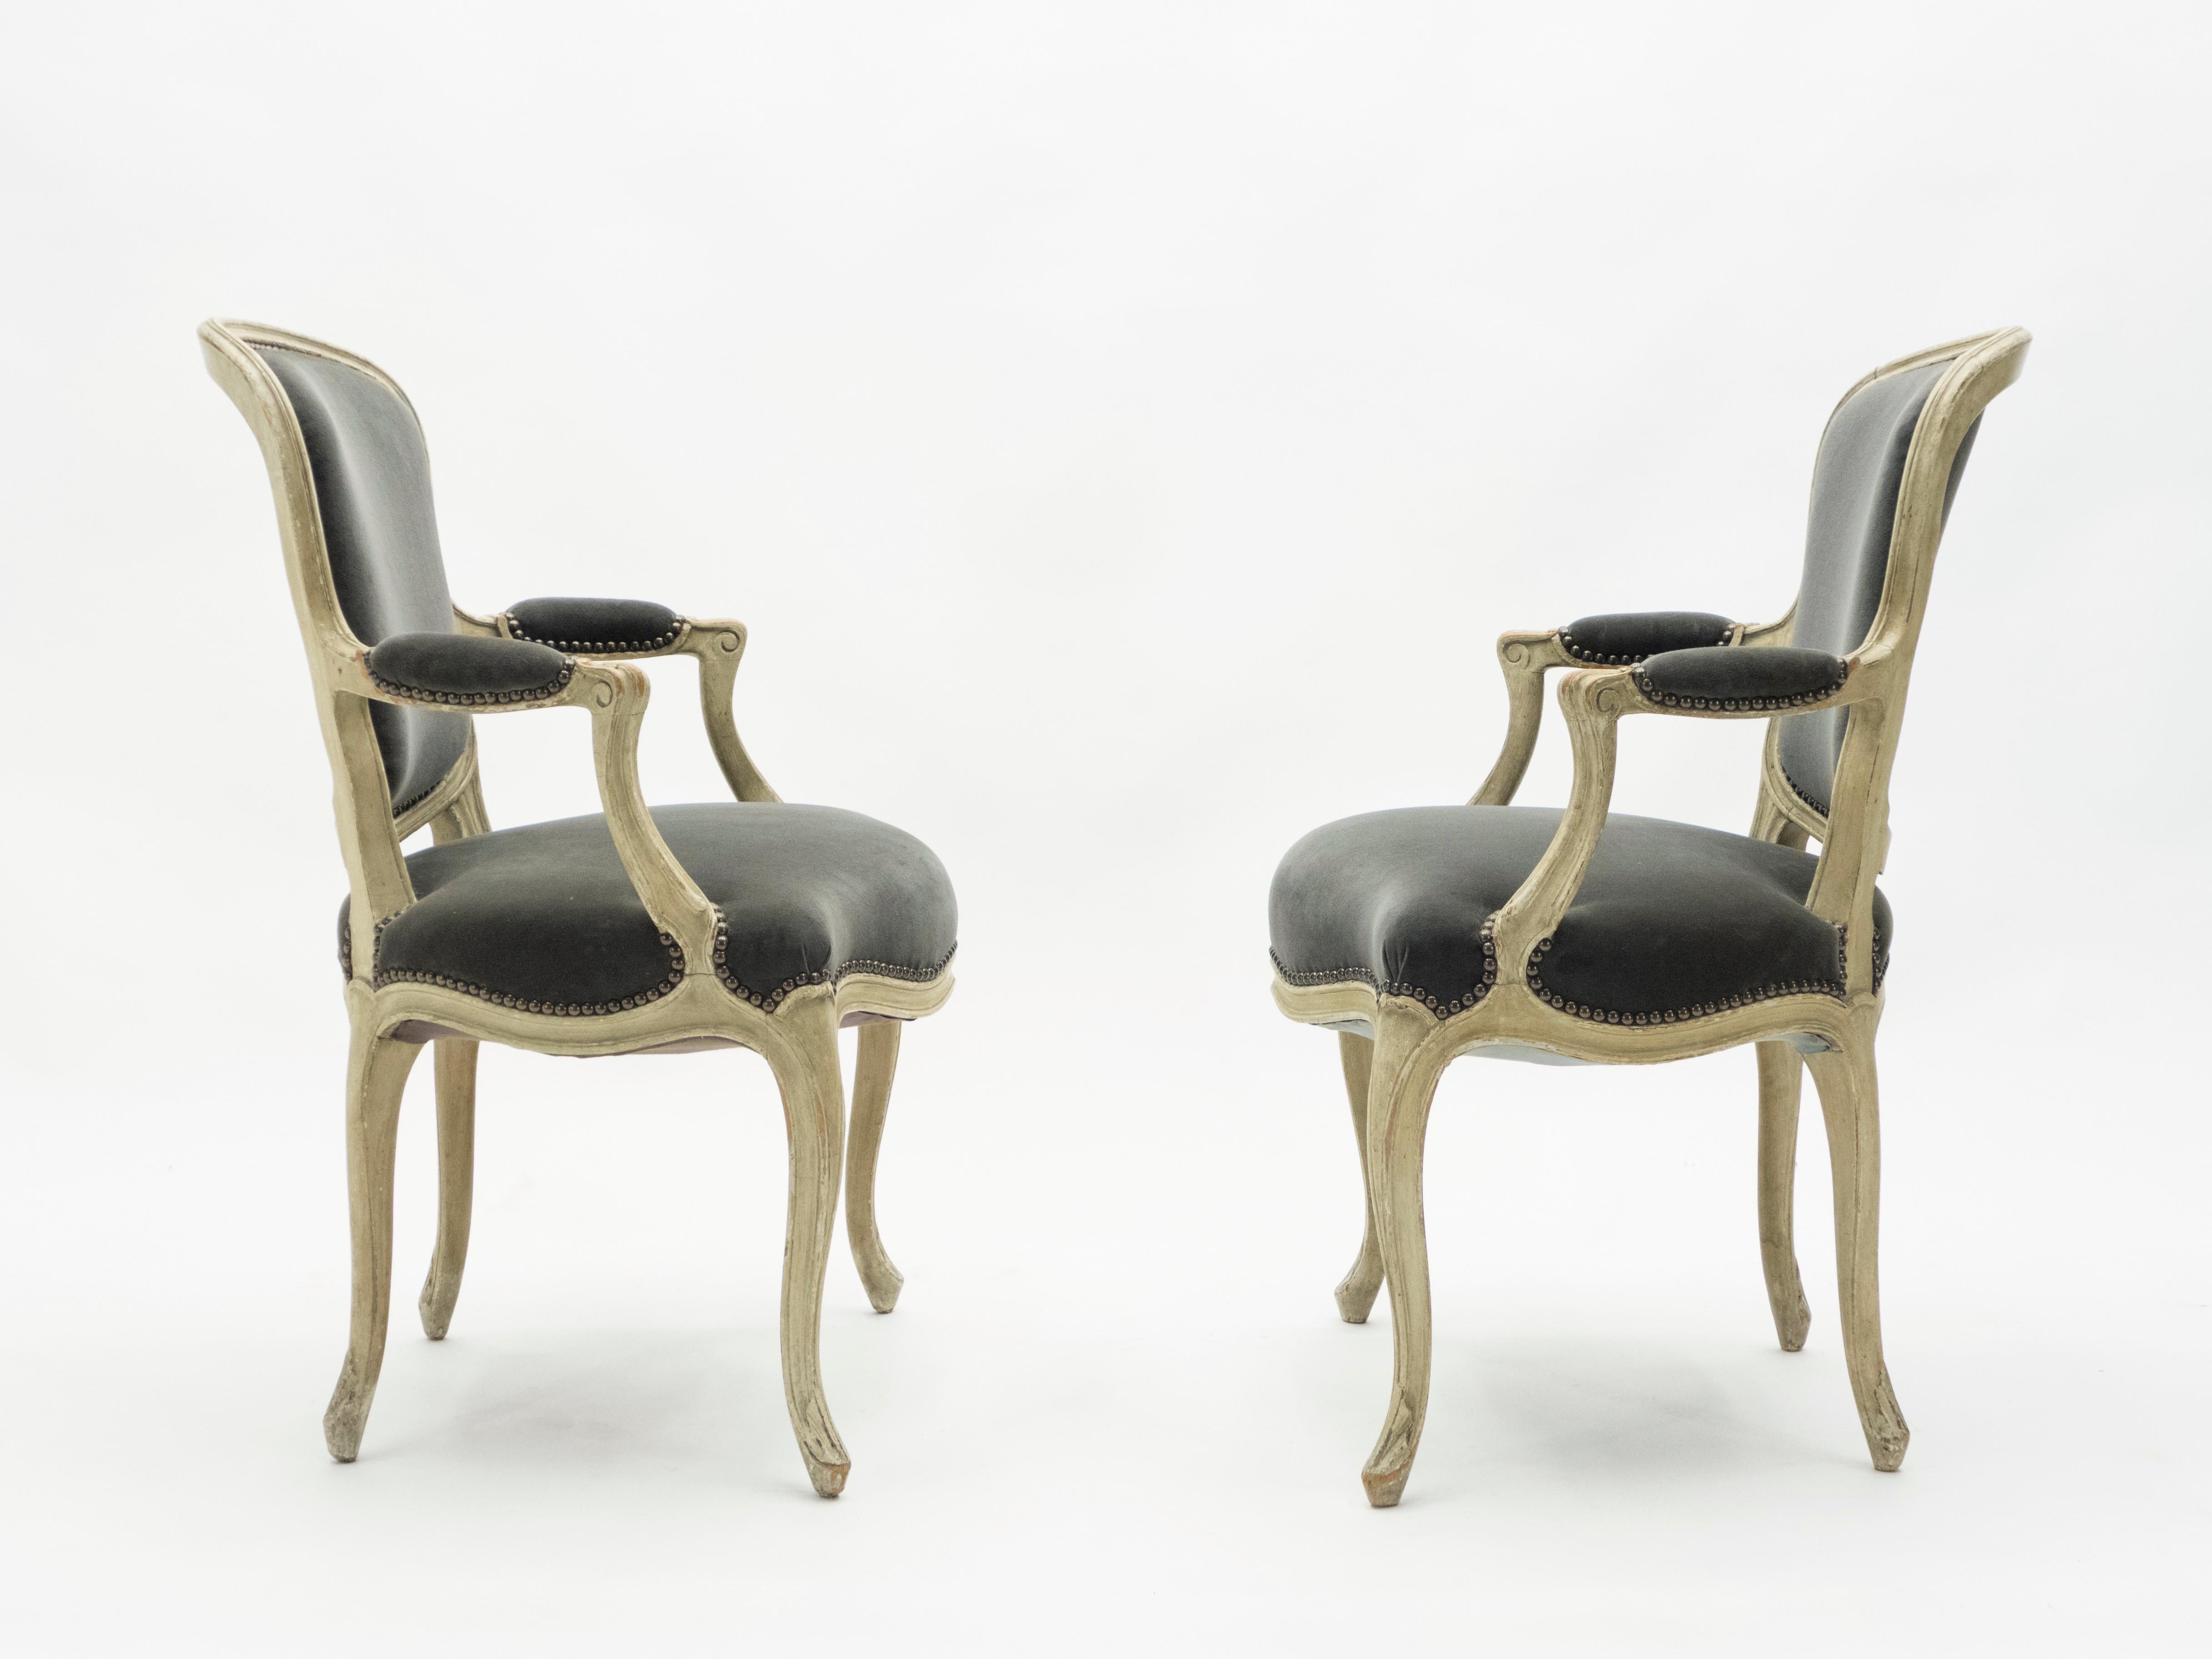 Mid-20th Century Rare Pair of Stamped Maison Jansen Louis XV Neoclassical Armchairs, 1940s For Sale